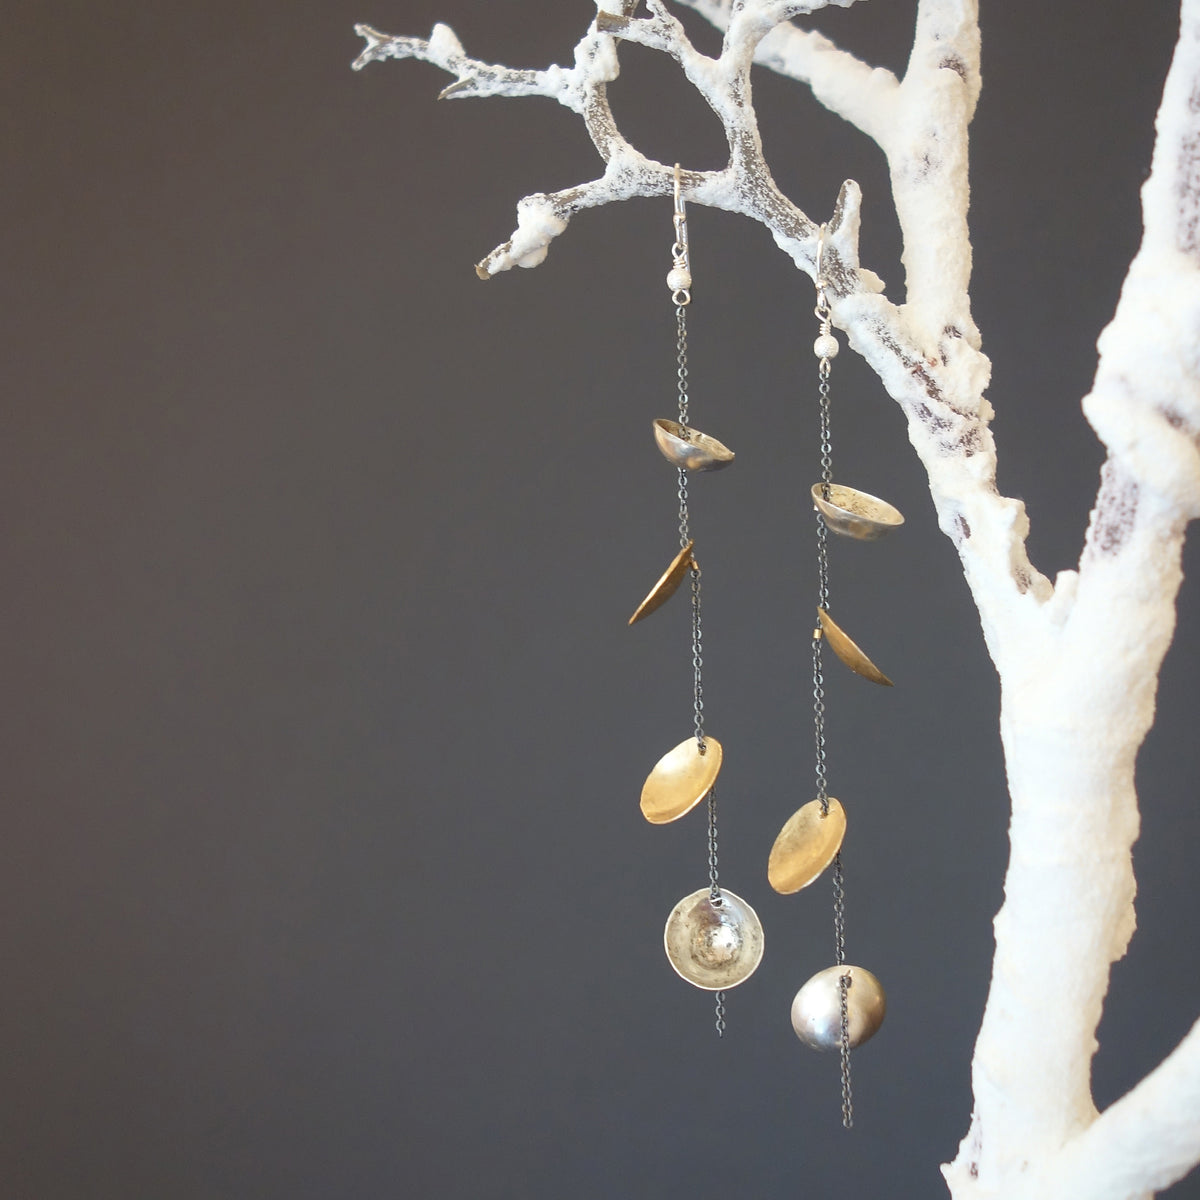 Balancing Act hand hammered gold/silver earrings